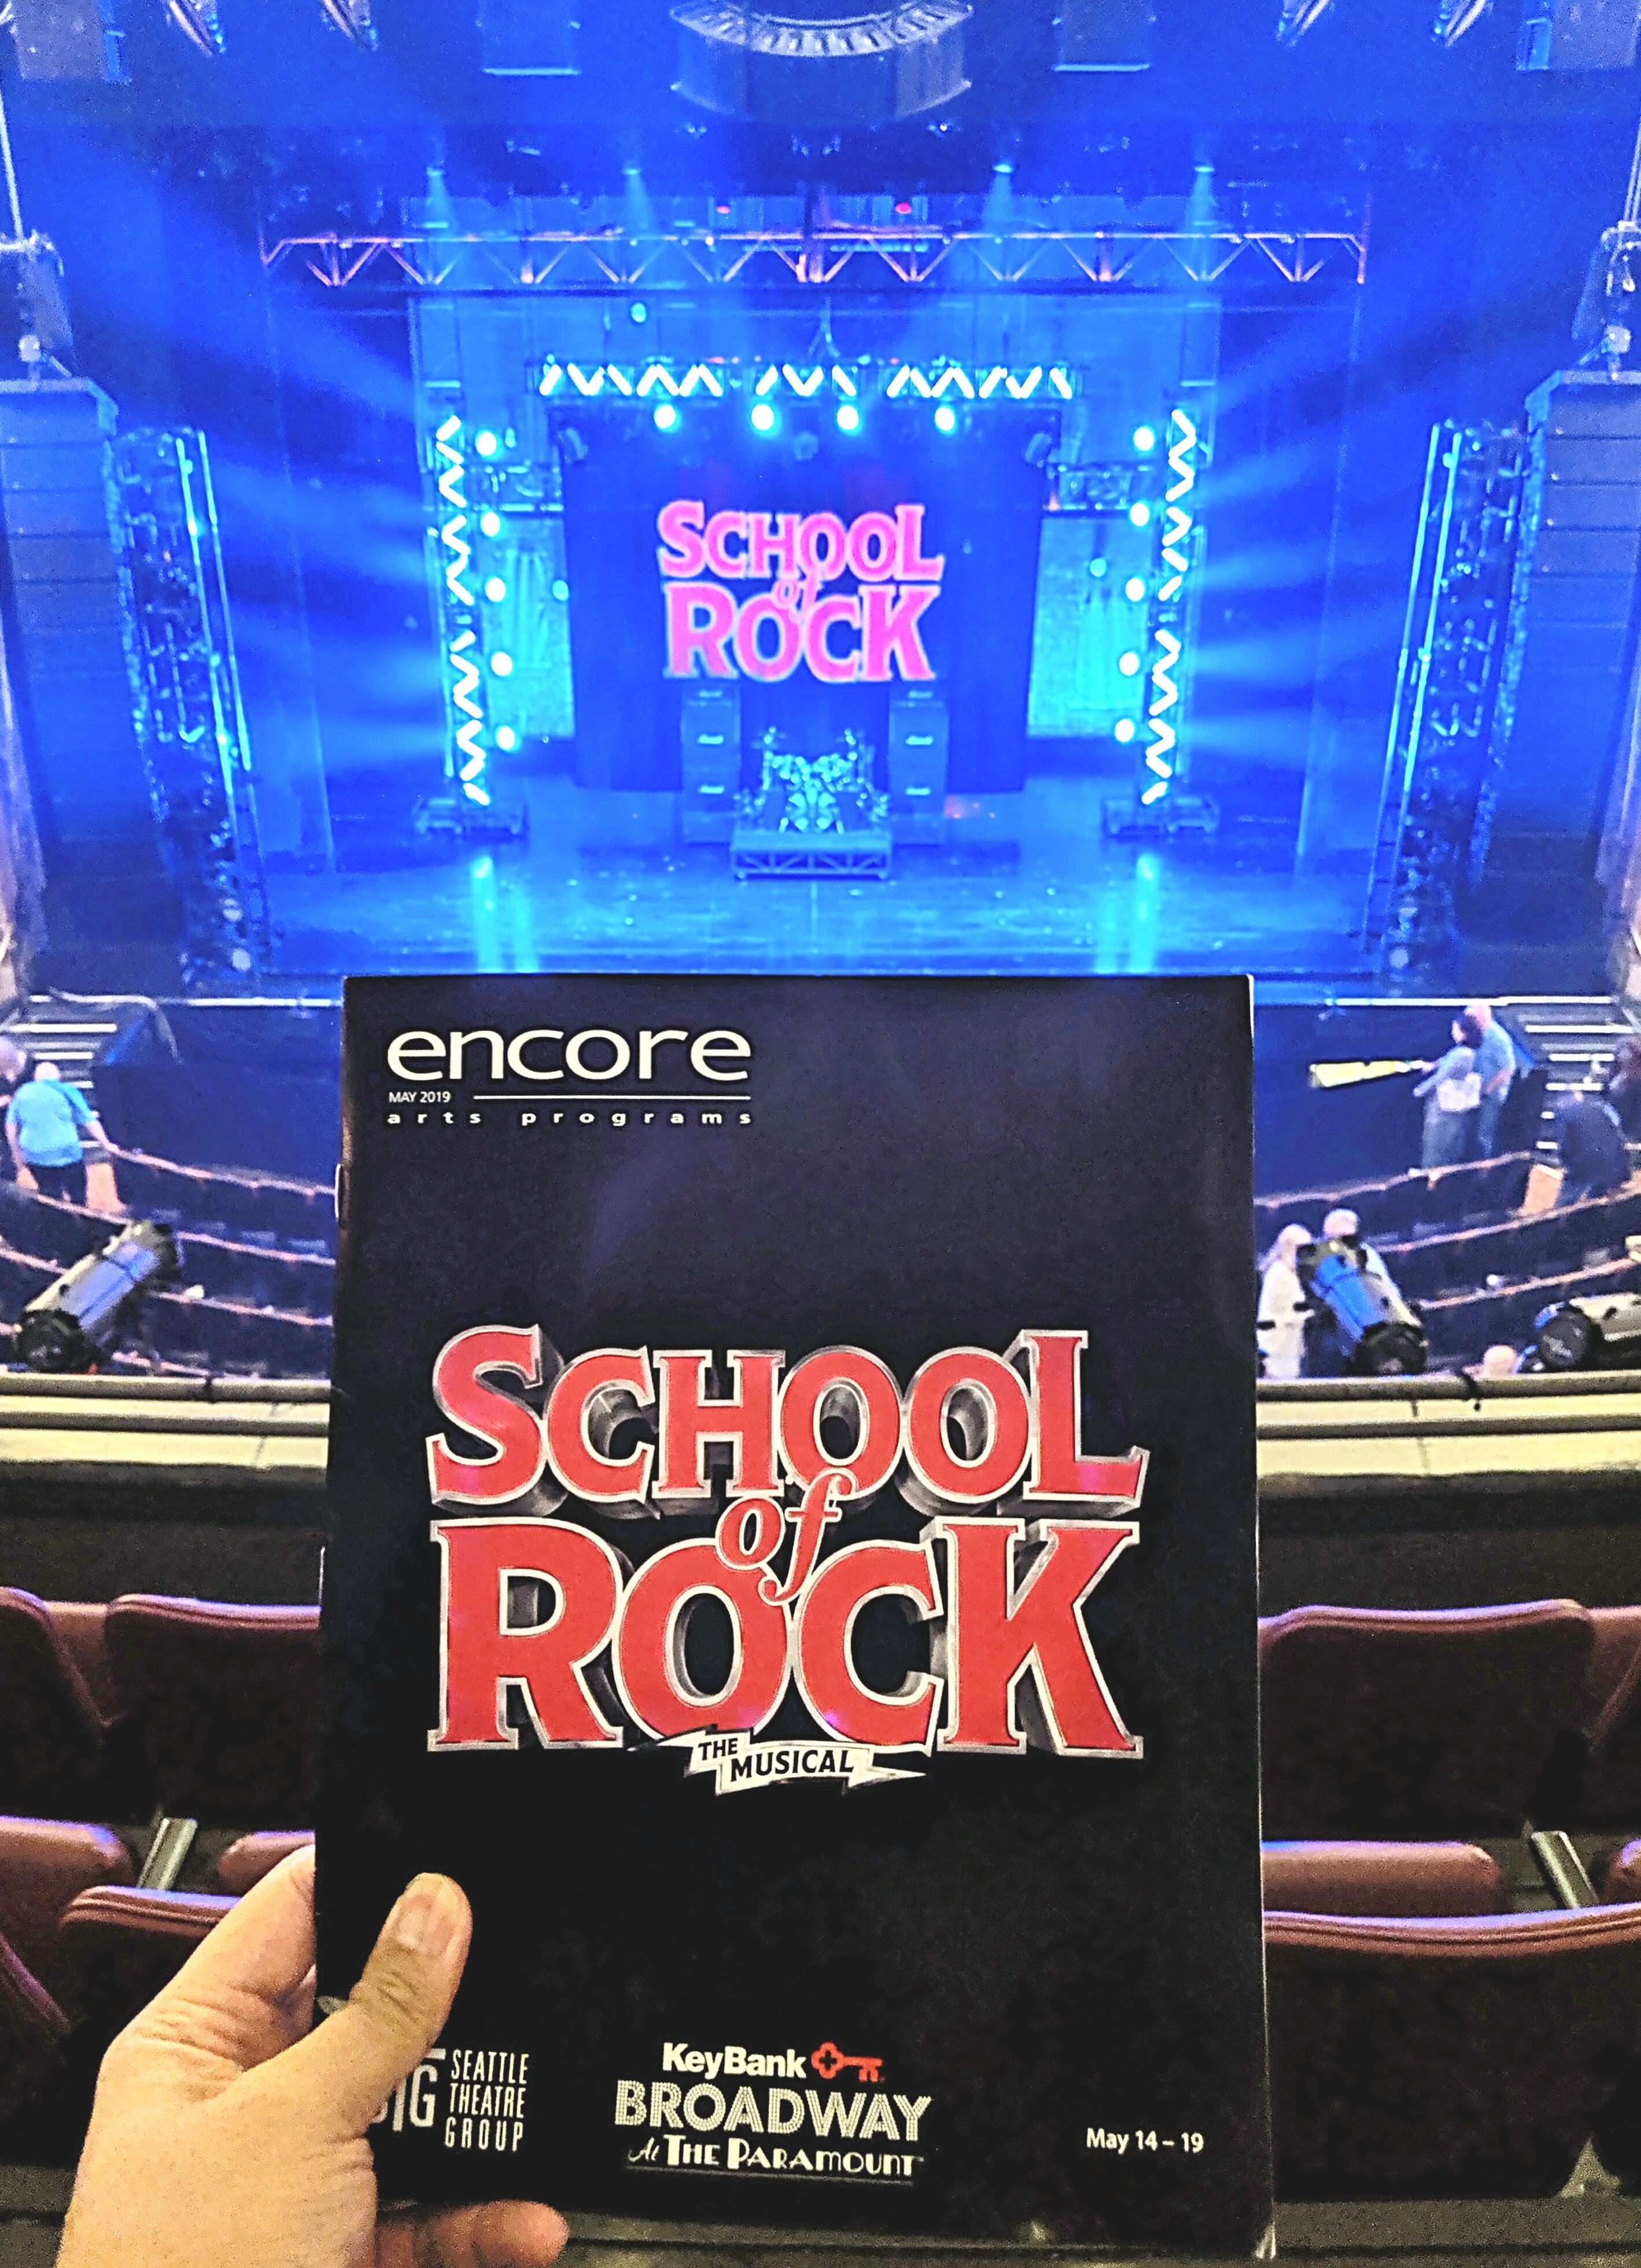 School of Rock the Musical w/ Seattle Theatre Group. #Talented kid performers but my least favorite Andrew Lloyd Webber #musical. Not a fan of shows w/ lots of #kids esp when the message is they know better than sensible adults.